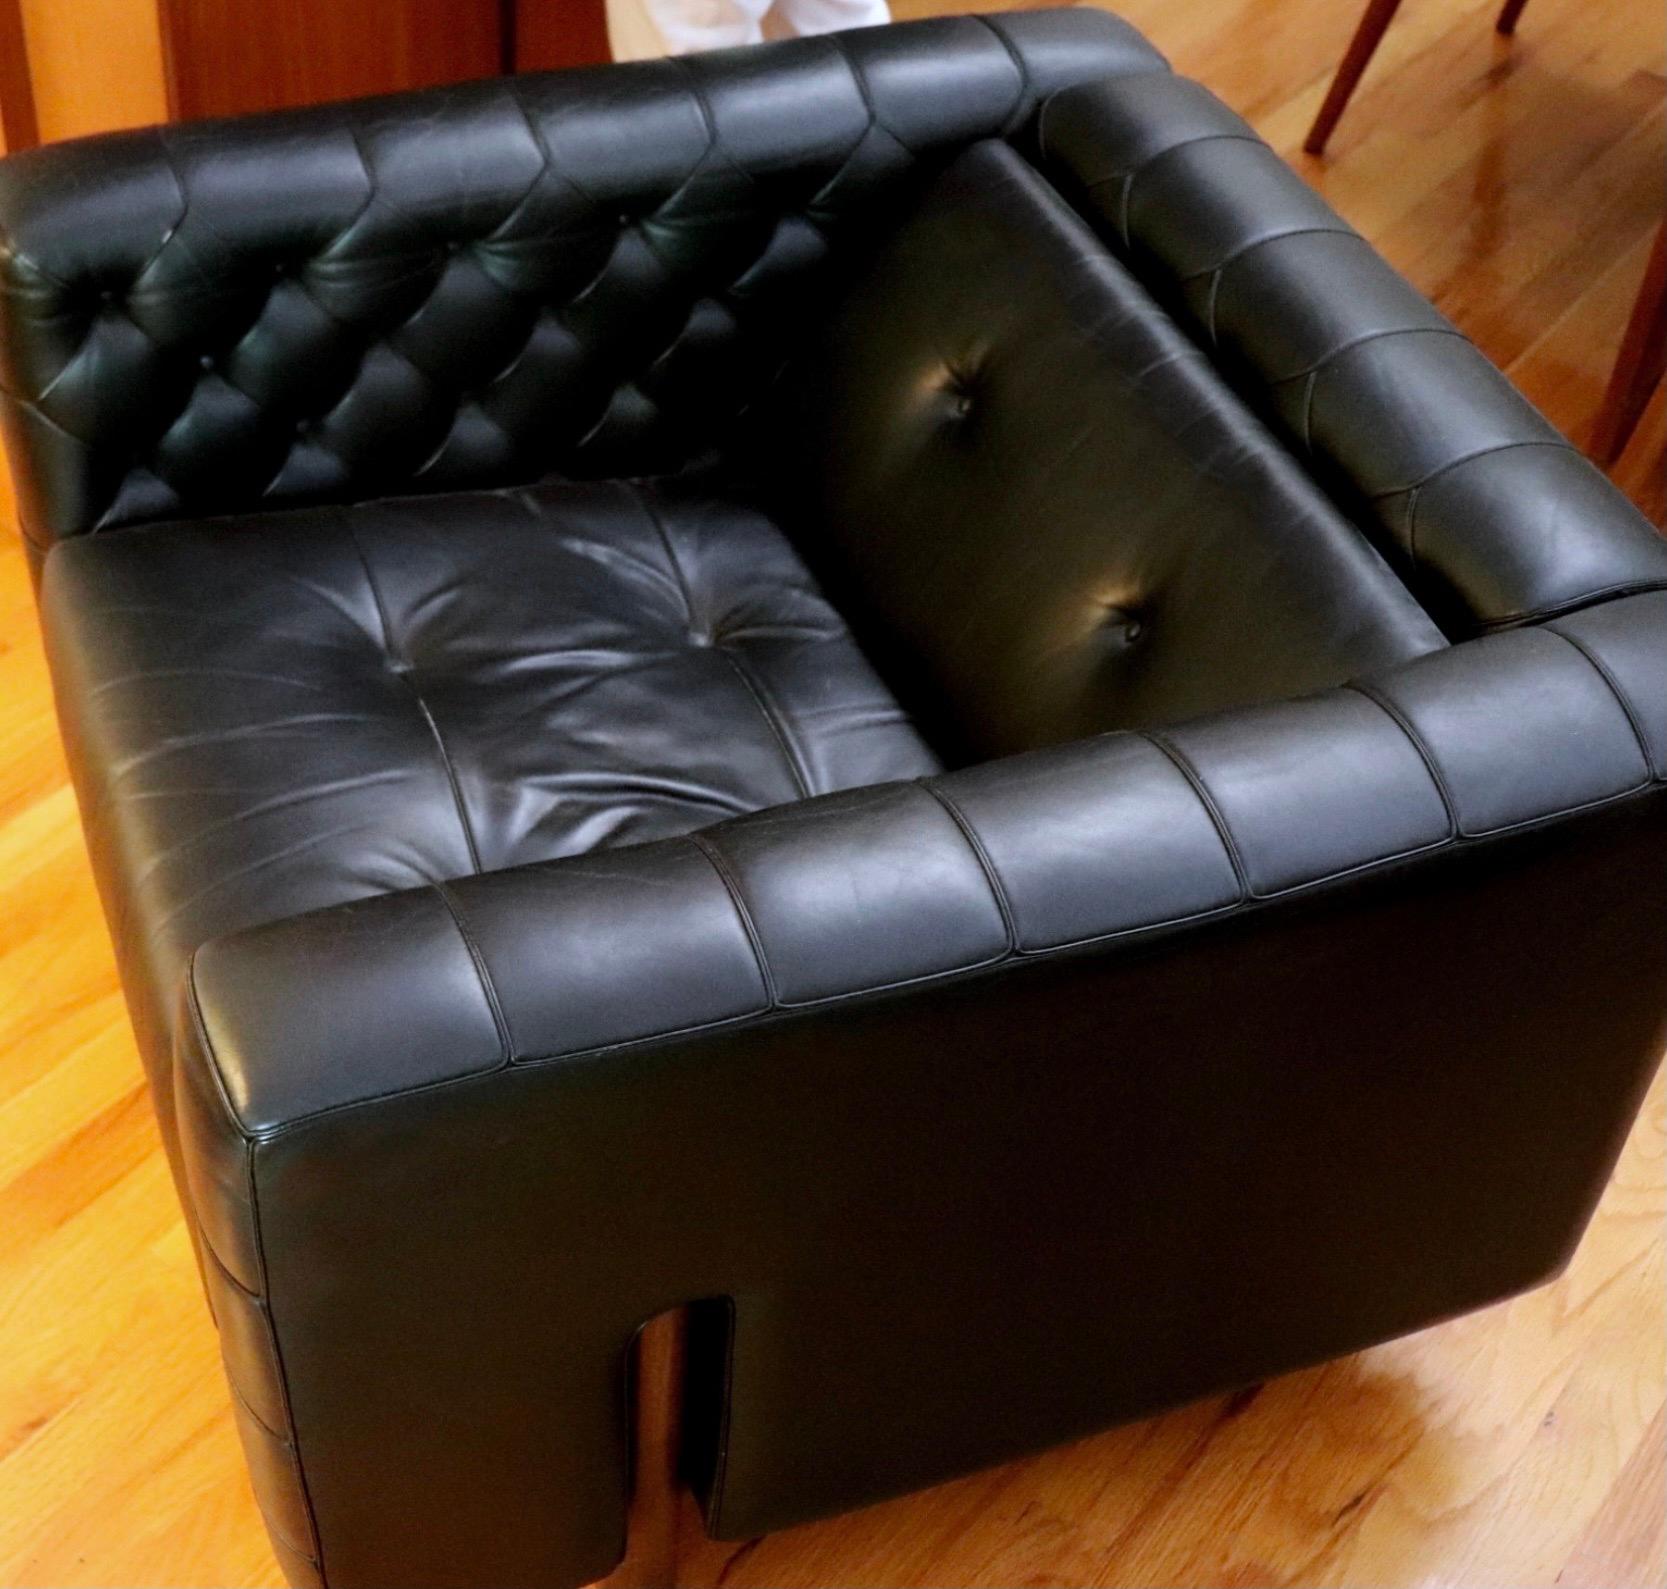 Gianfranco fratelli cube lounge chair hand-stitched black leather Cassina, Italy. Gorgeous sculptural form. Masterful leatherwork, quilting and tufting, with inset wooden legs. All original. Extremely rare. Labelled Cassina and Atelier